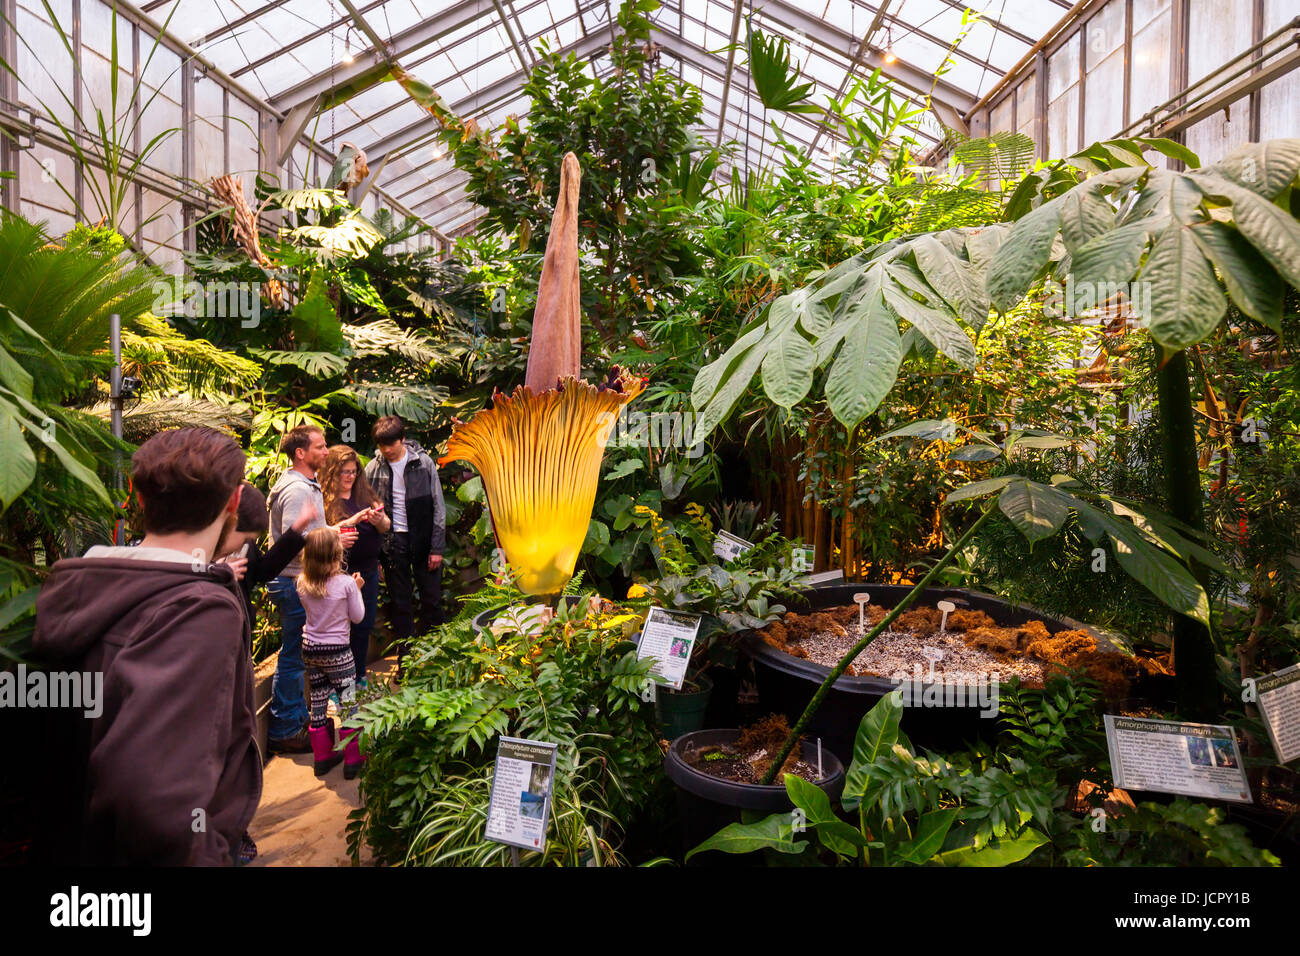 People viewing a titan arum or Amorphophallus titanum in full bloom, it is a flowering plant or carrion flower that is native to Western Sumatra. Stock Photo